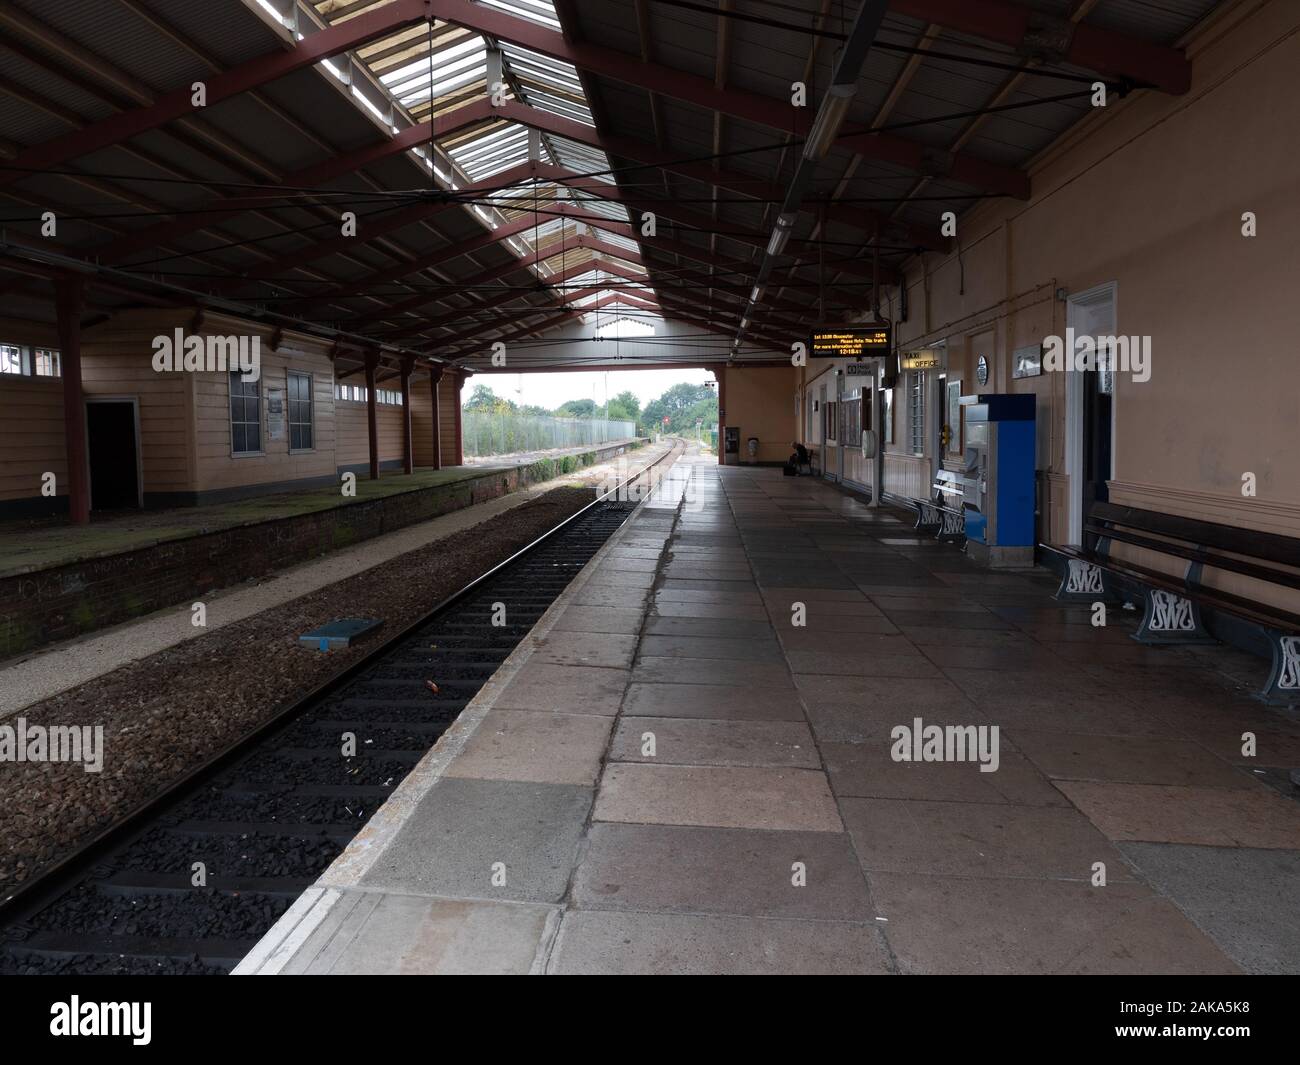 The wooden railway station at Frome Somerset interior view Stock Photo